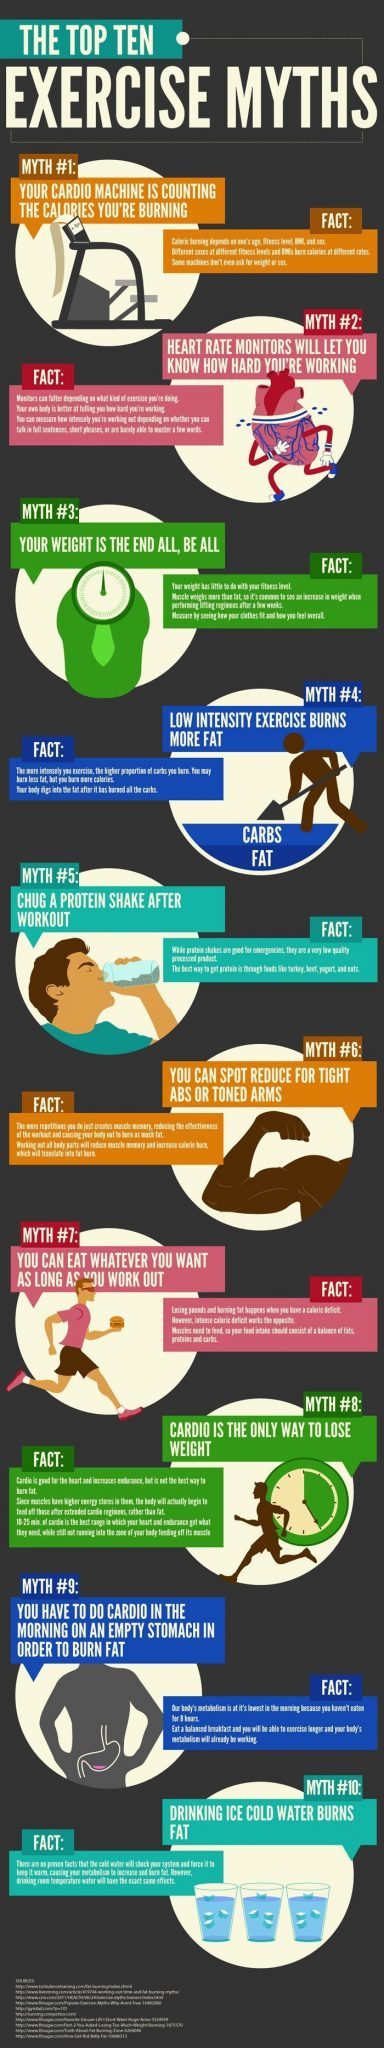 exercise myths infographic